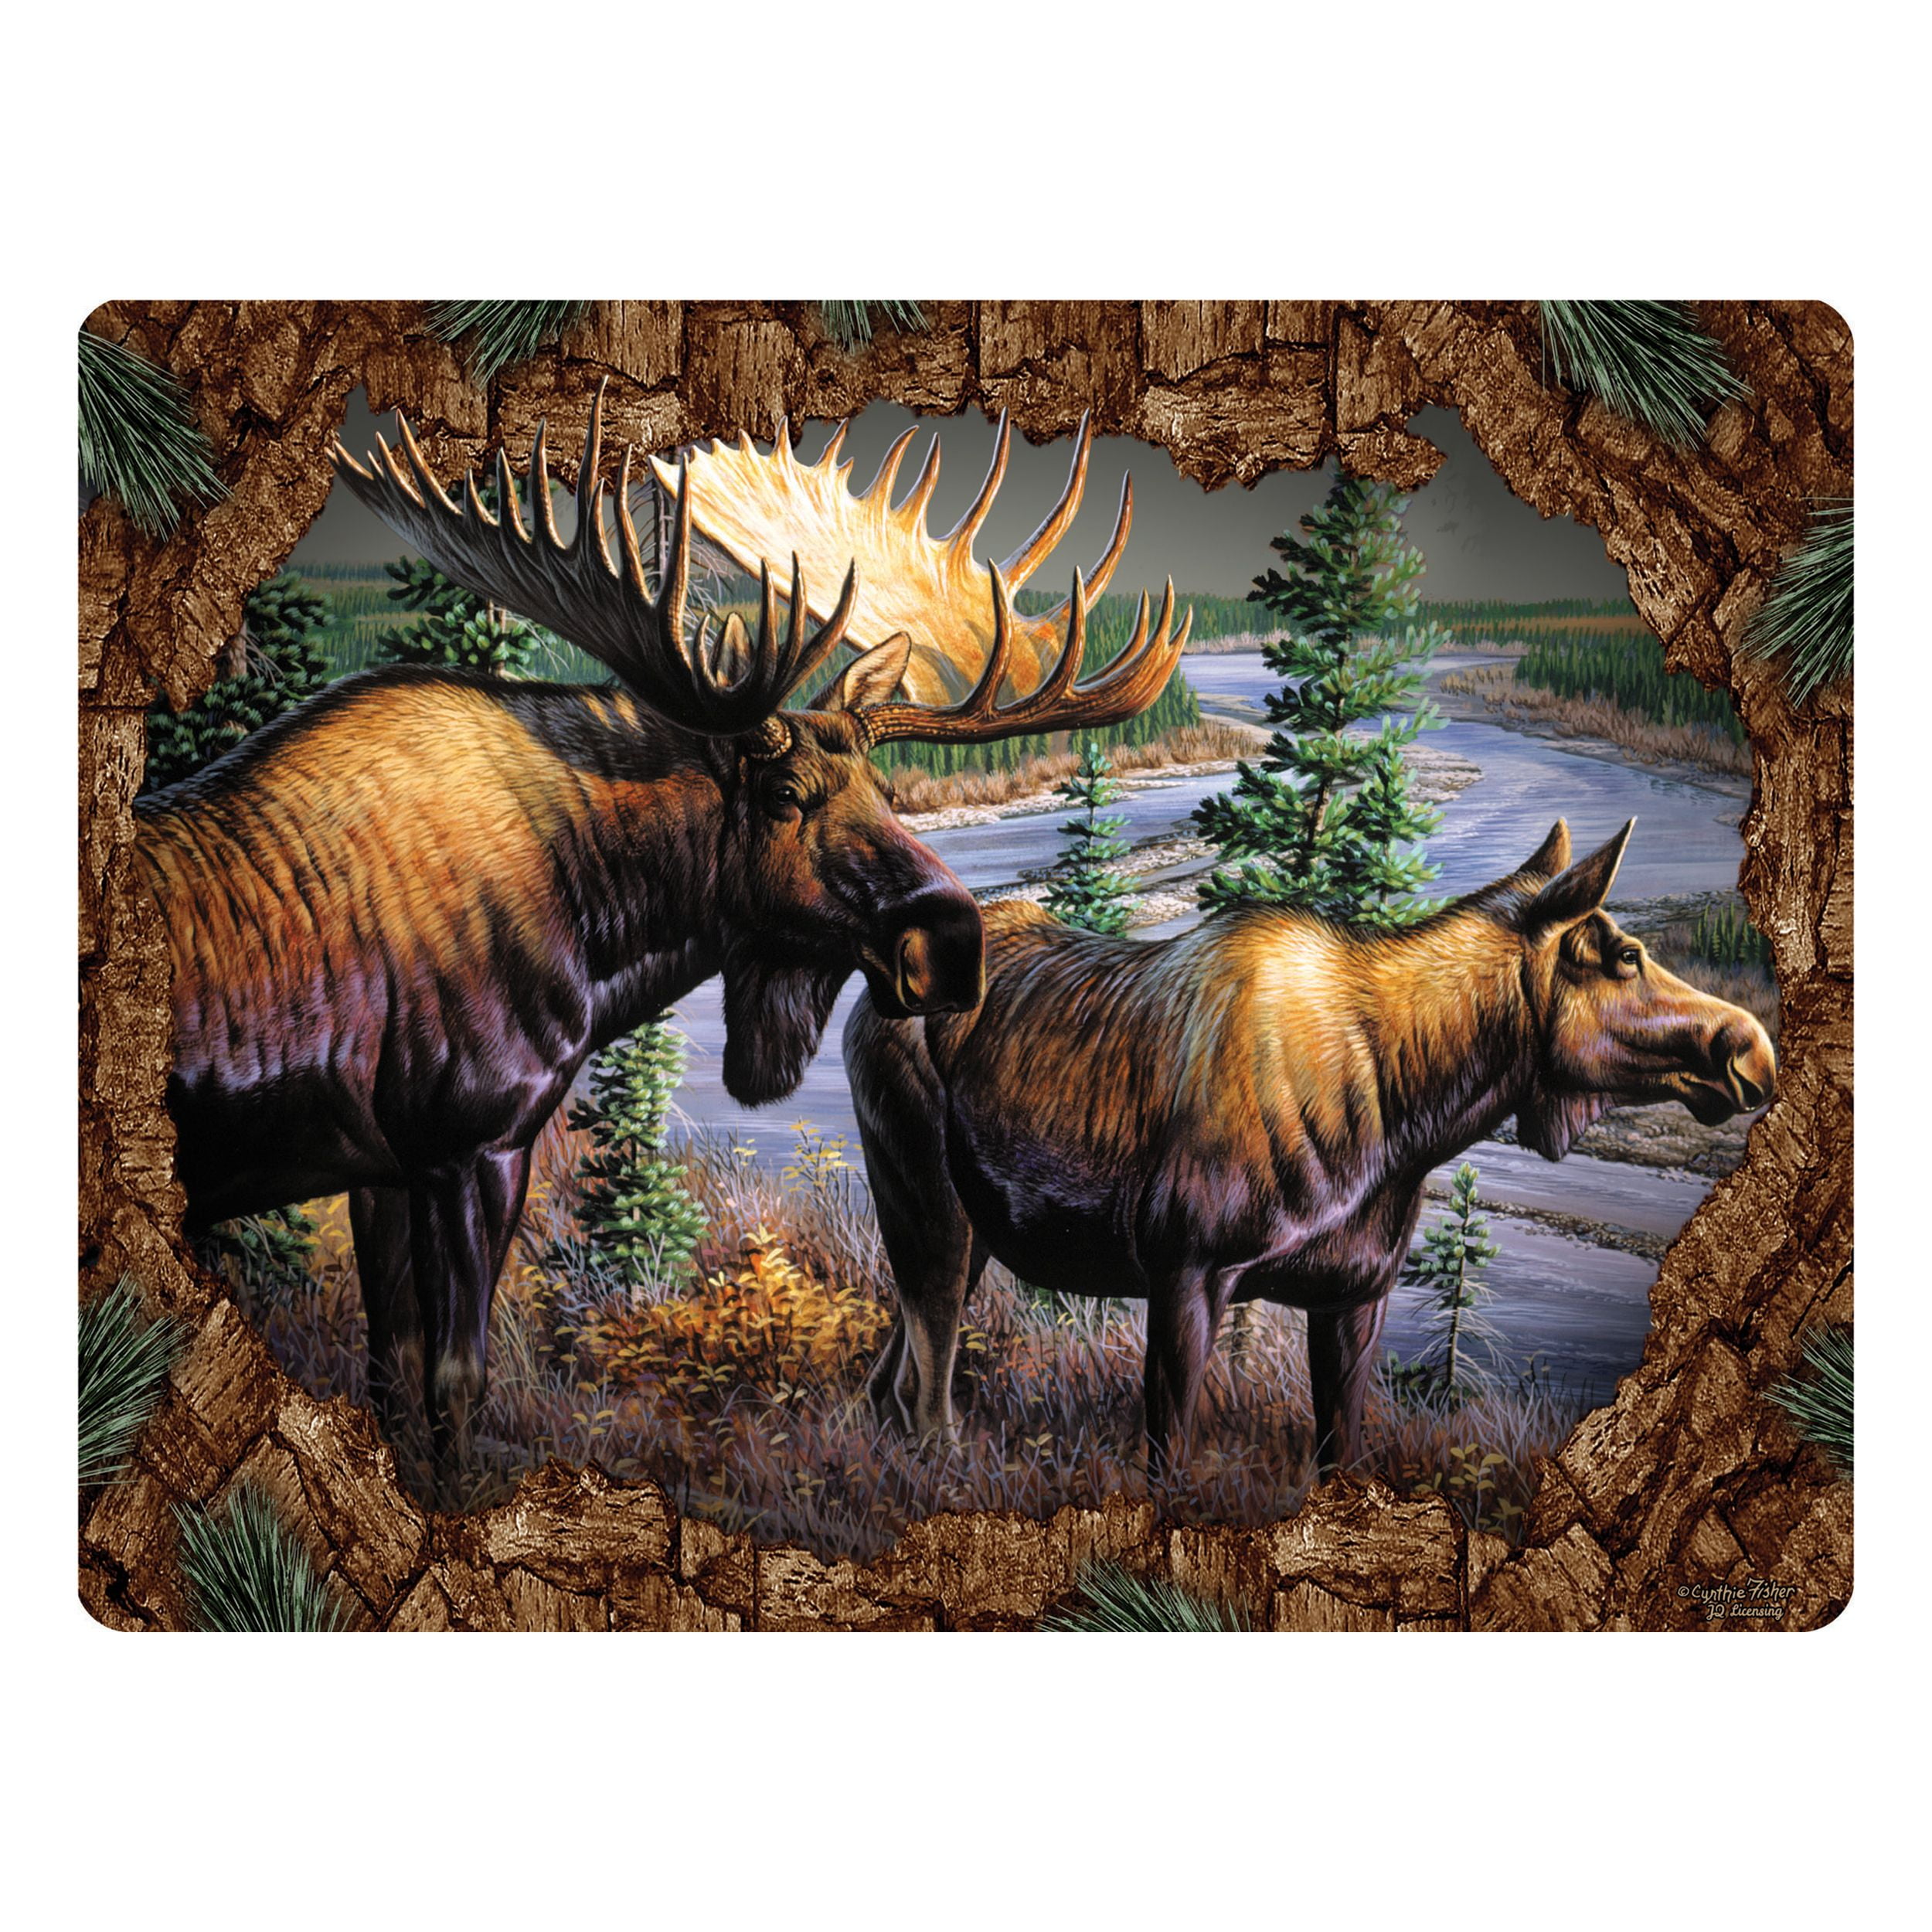 Tempered Glass Cutting Board 12 By 16 Inches Moose